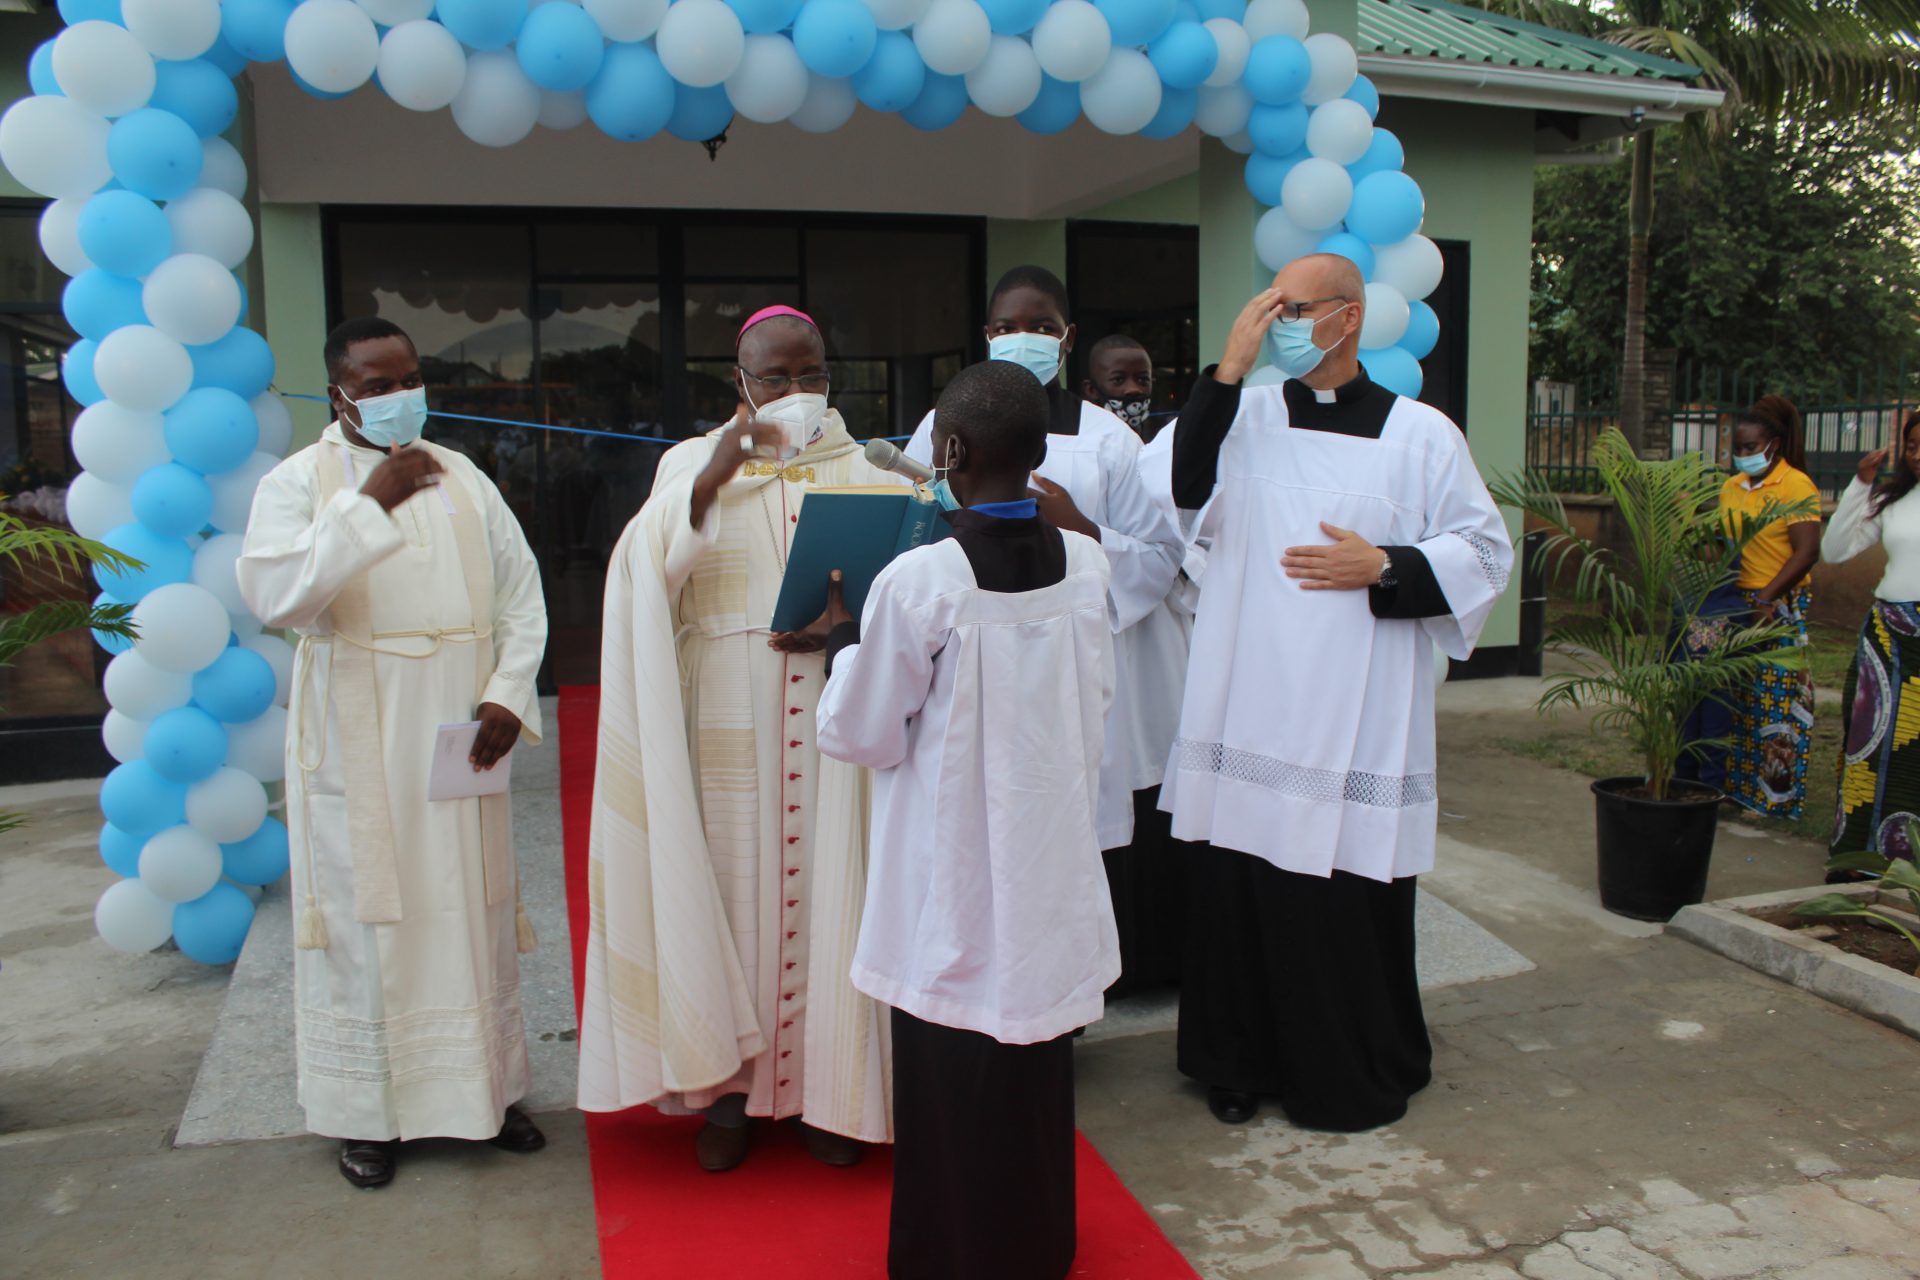 Official Opening of the Cathedral of Christ the King Grotto